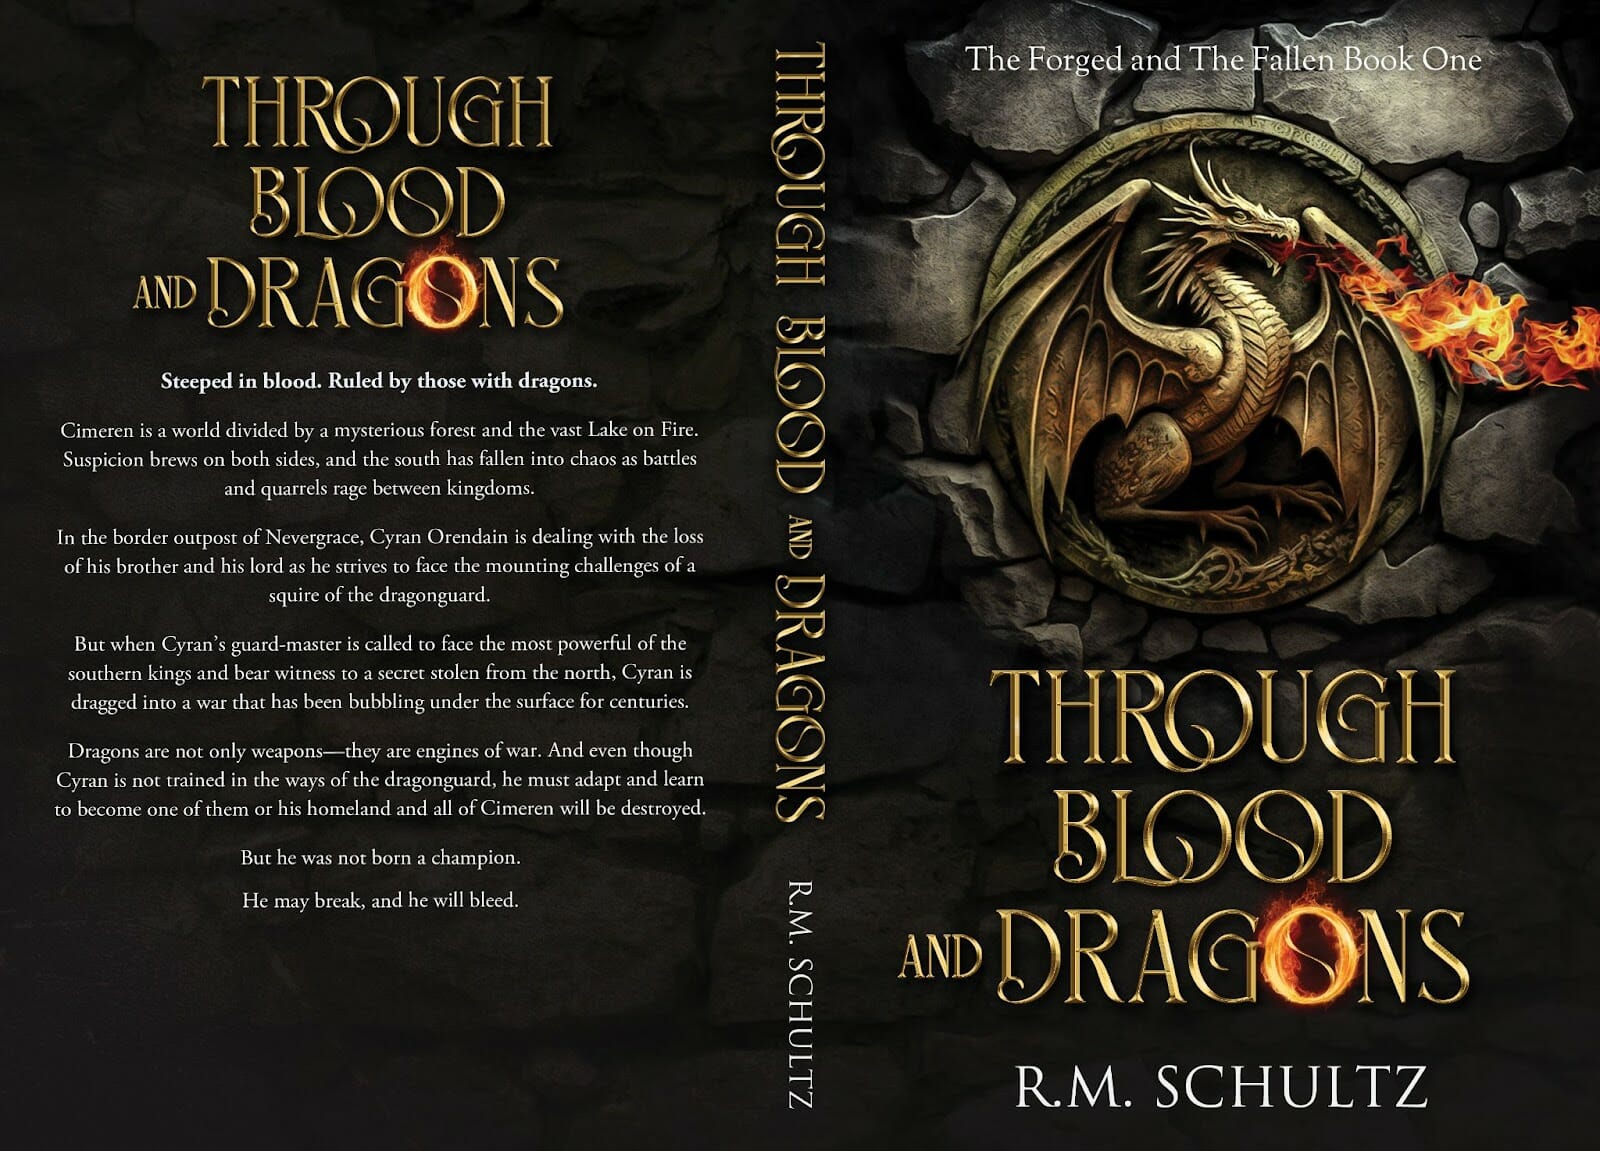 how to design a book cover with through the Blood and Dragons example